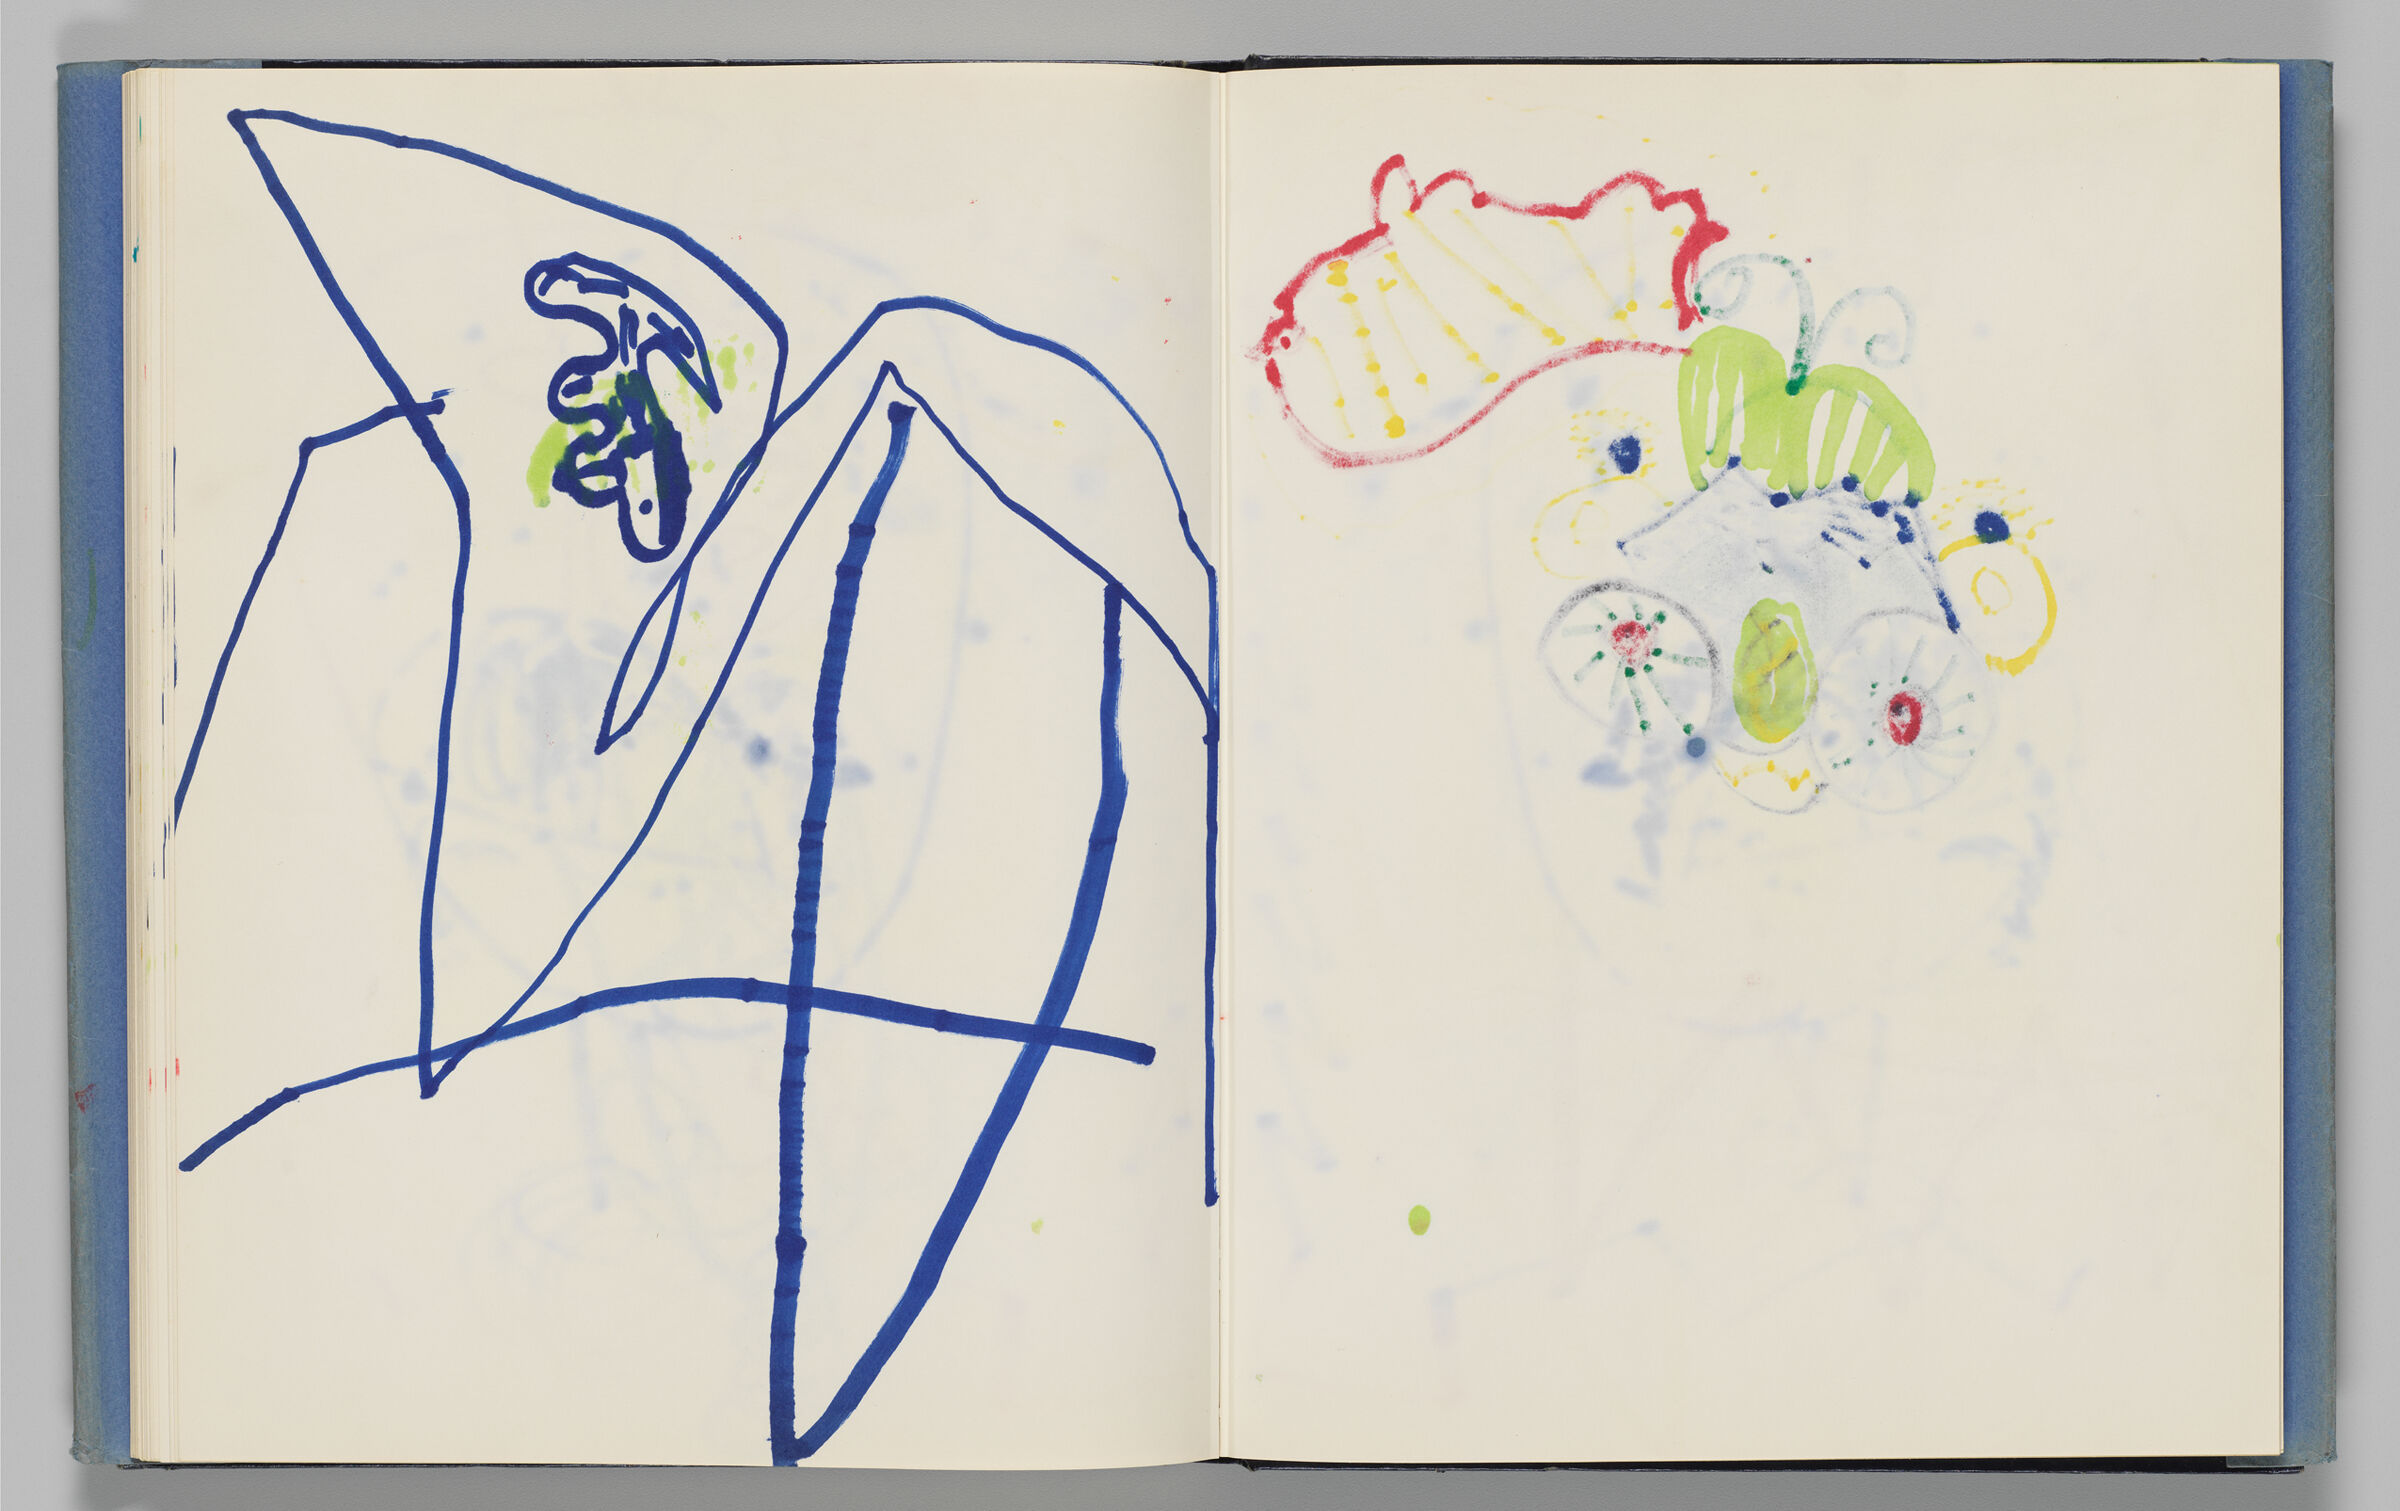 Untitled (Child's Drawing With Color Transfer, Left Page); Untitled (Bleed-Through Of Following Page And Color Transfer, Right Page)